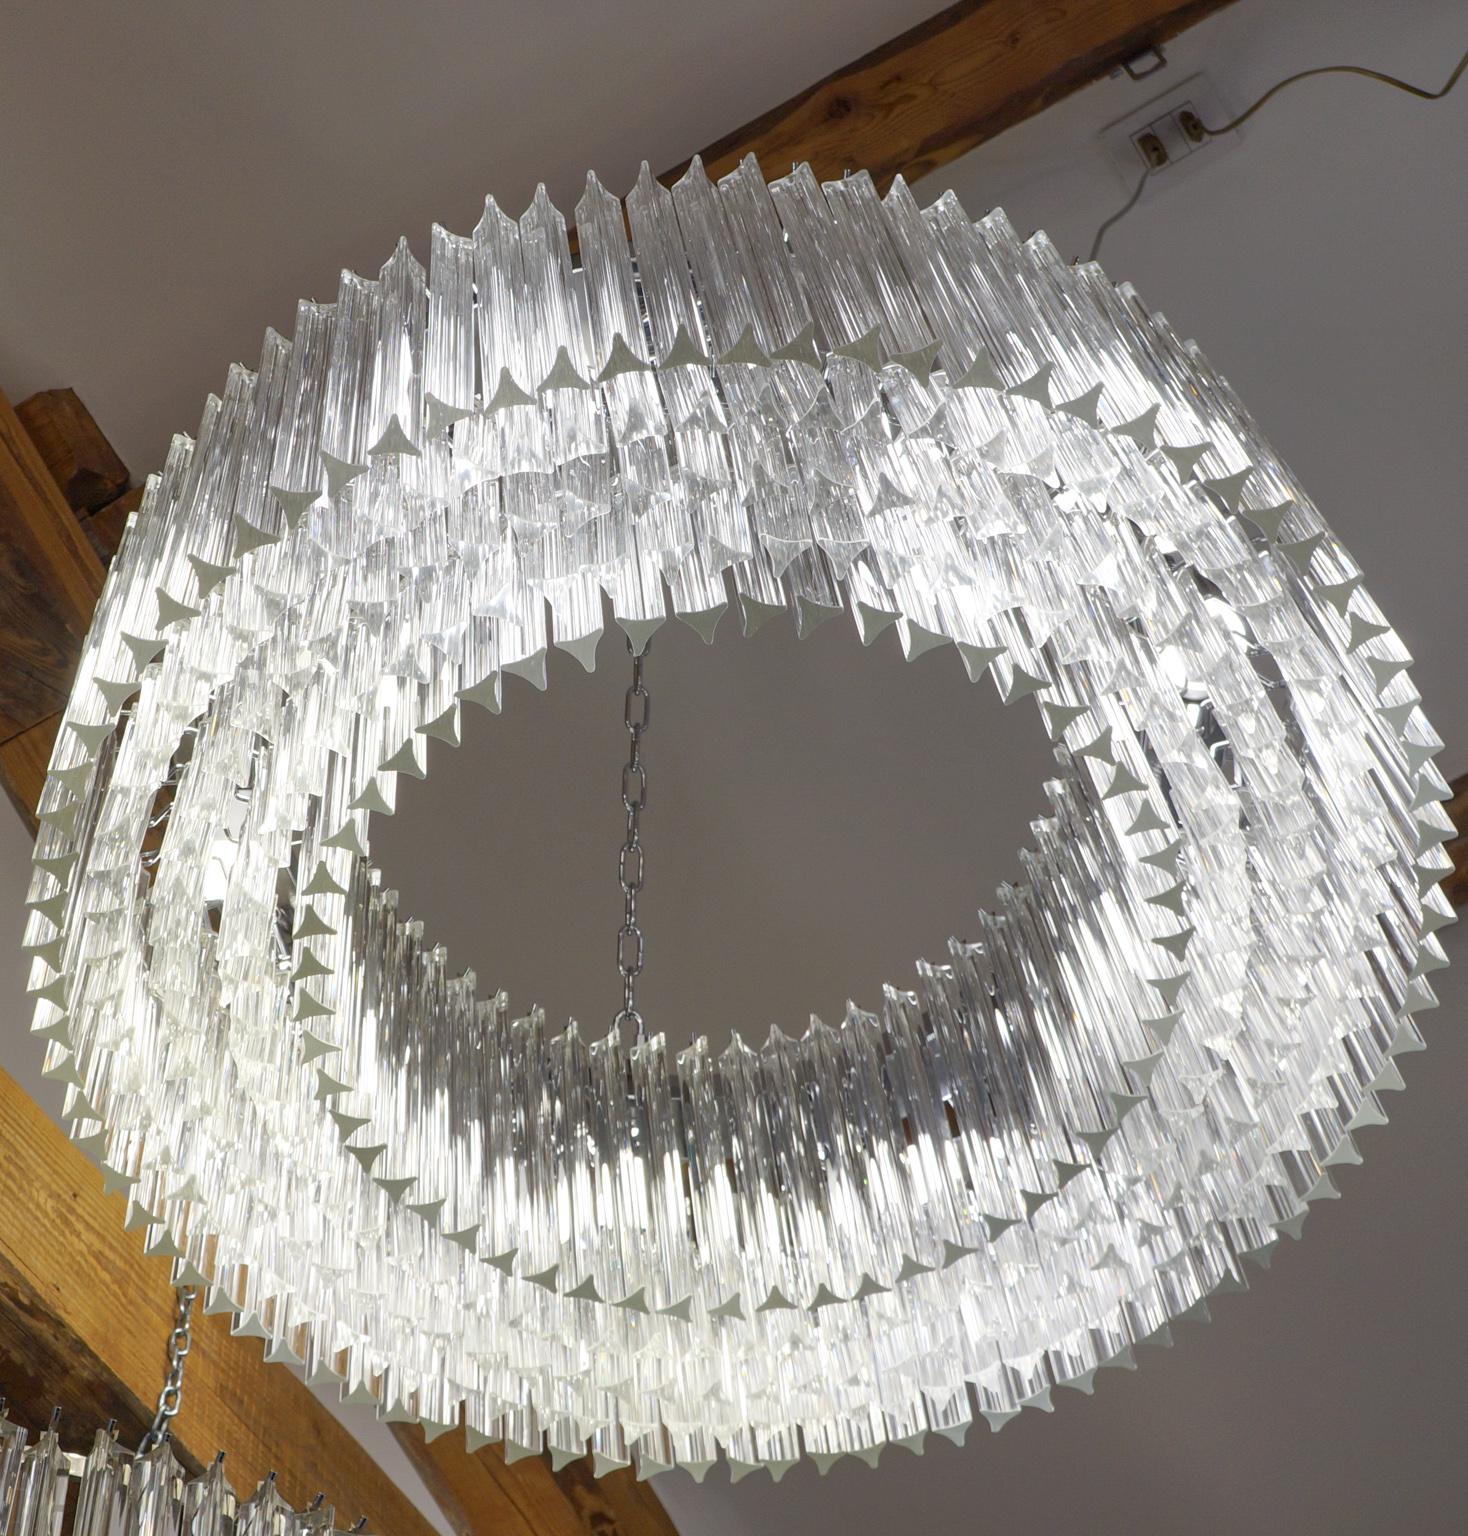 Murano glass chandelier with 370 elements in crystal, nickel finish structure and nine E26 / E27 bulbs. The elements of this typical chandelier are called Triedri, for its triangular shape. The assistants take a small quantity of glass from the